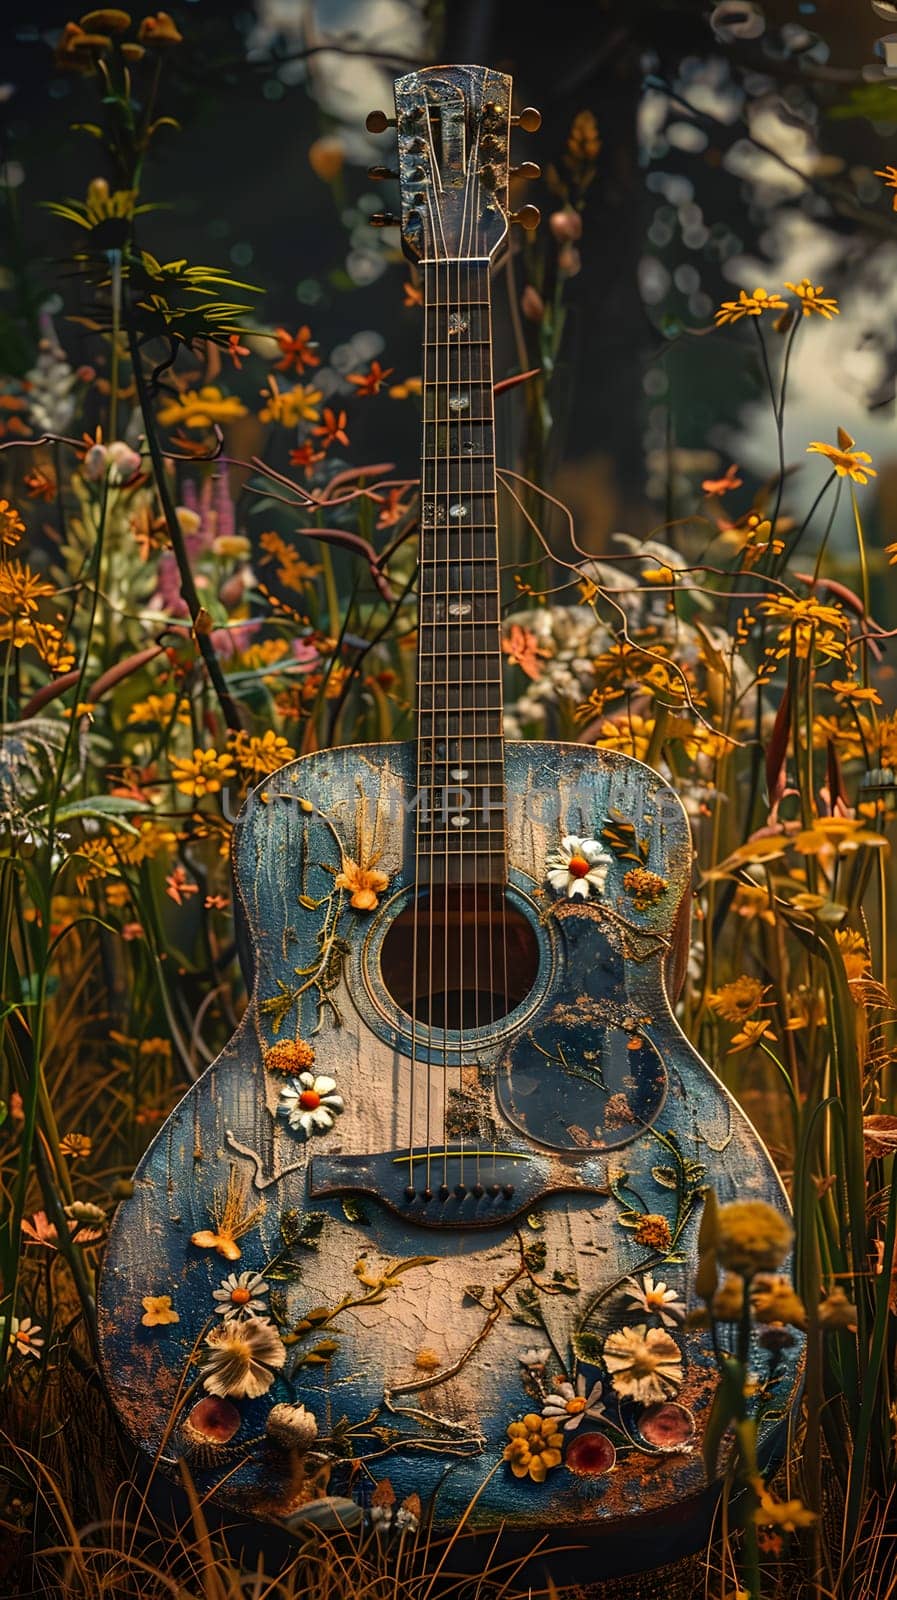 Guitar amidst flowers in a field, contrasting urban design with nature by Nadtochiy